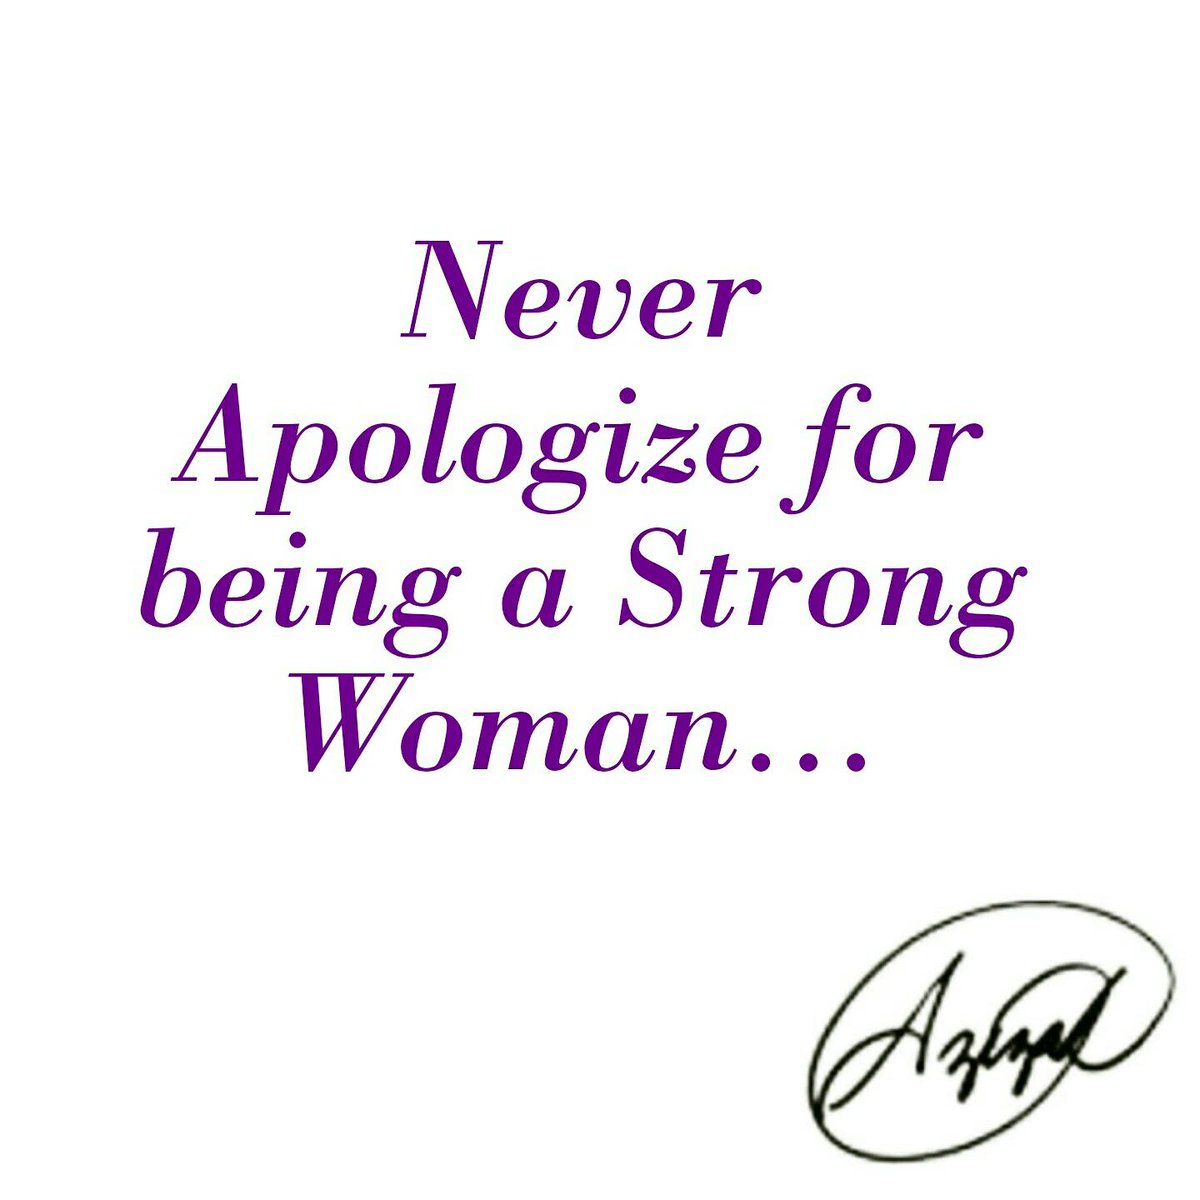 Never Apologize for Being a Strong Woman